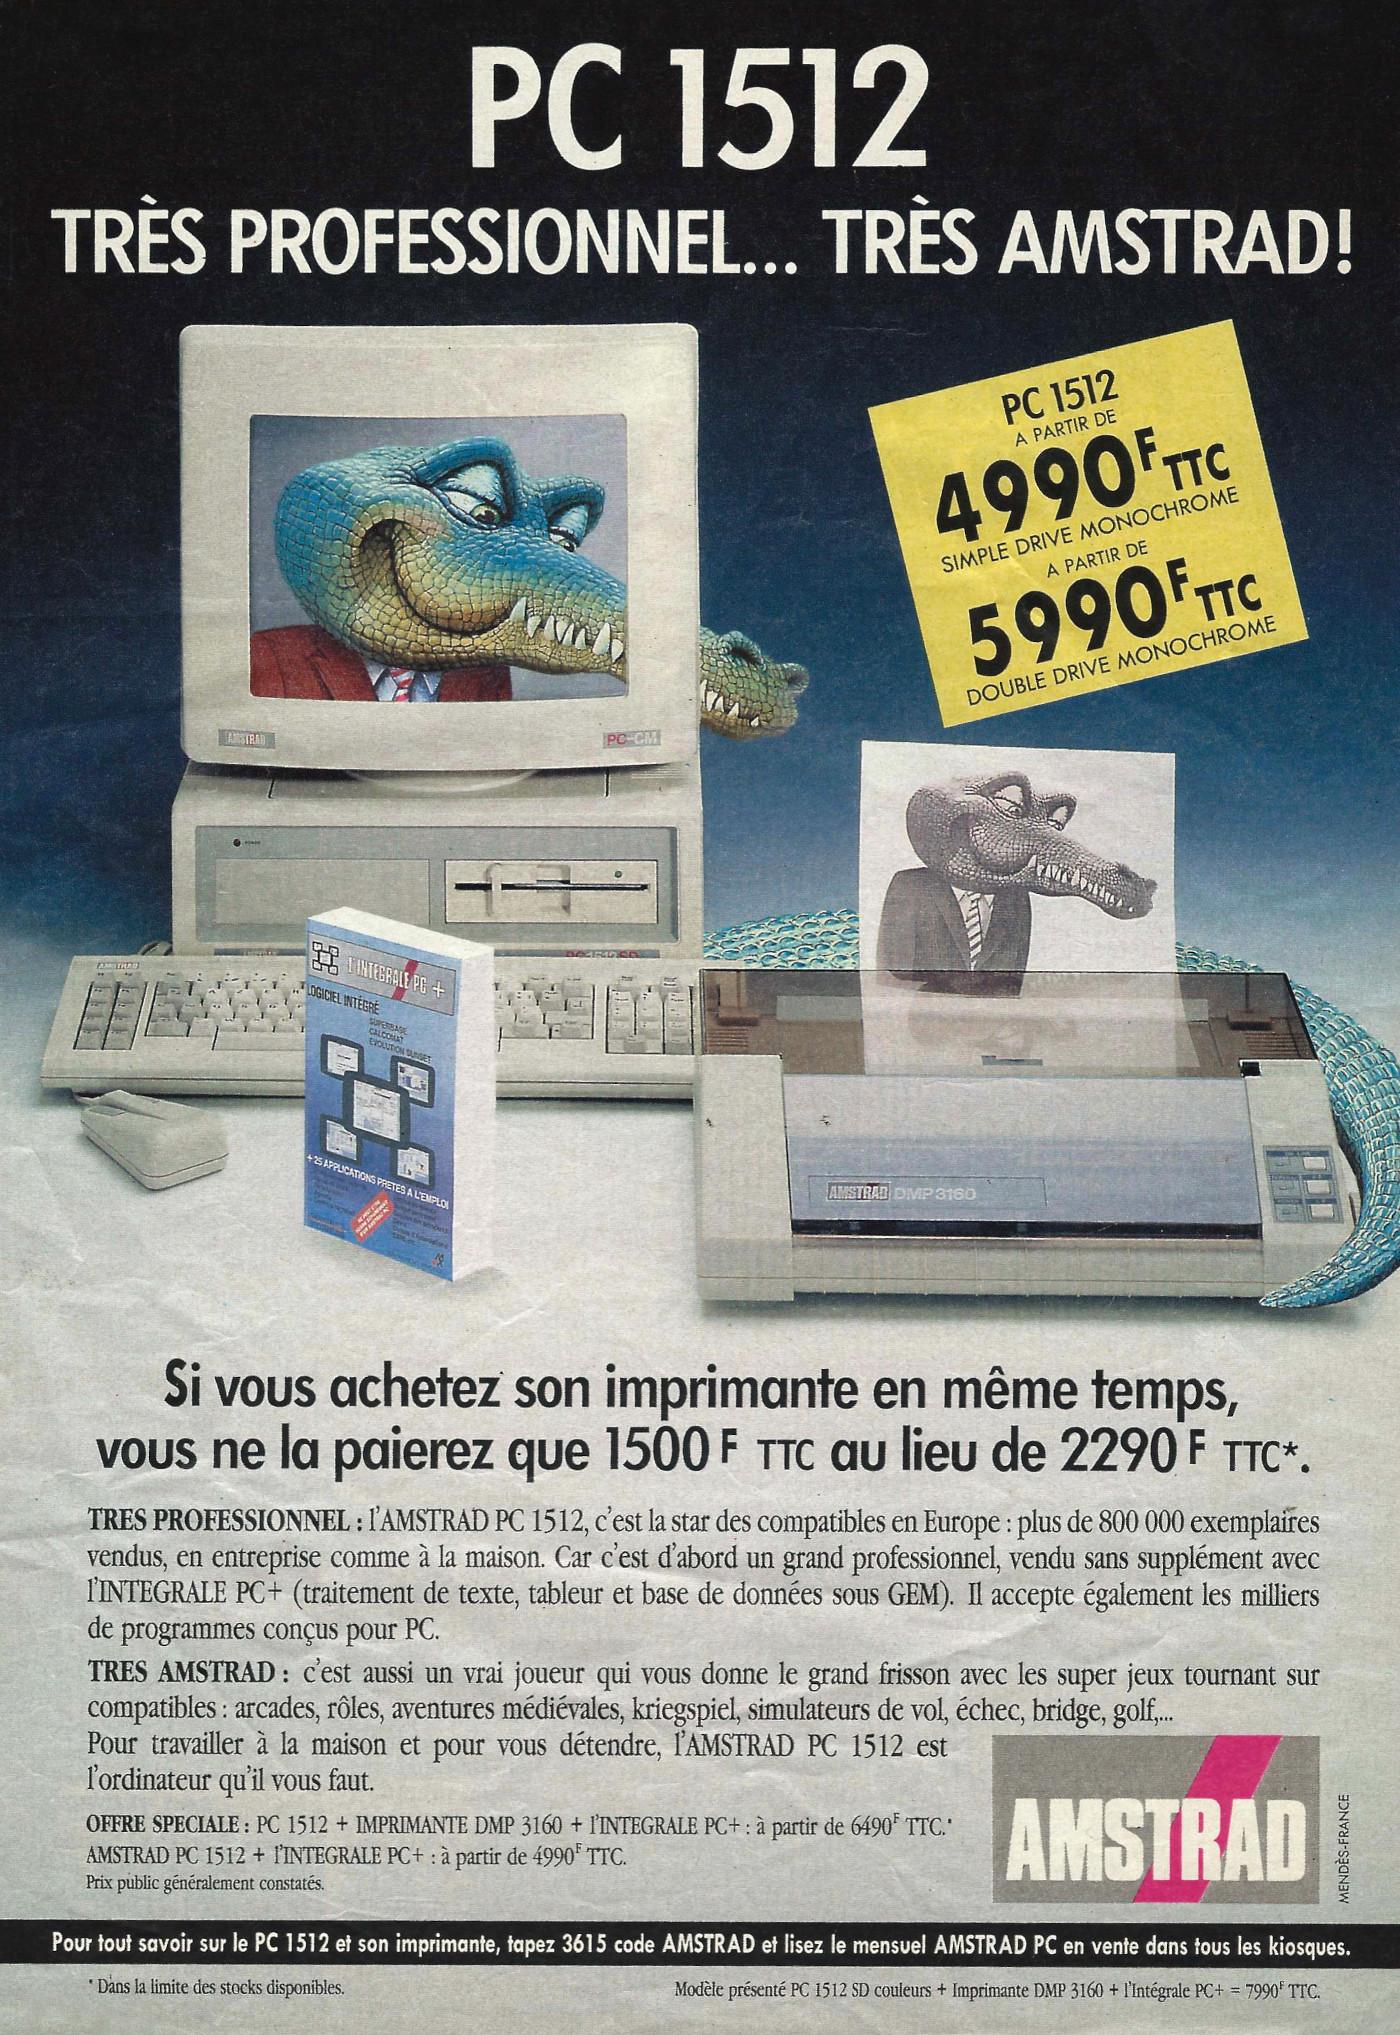 An Amstrad advert placed in a French magazine, showing the PC 1512 in a bundle offer with a printer for 1500F instead of 2290F, which is about a £79 discount, or £250 in 2024. The advert also claims <span class='hilite'>that</span> more than 800,000 1512s had been sold to businesses and home users.